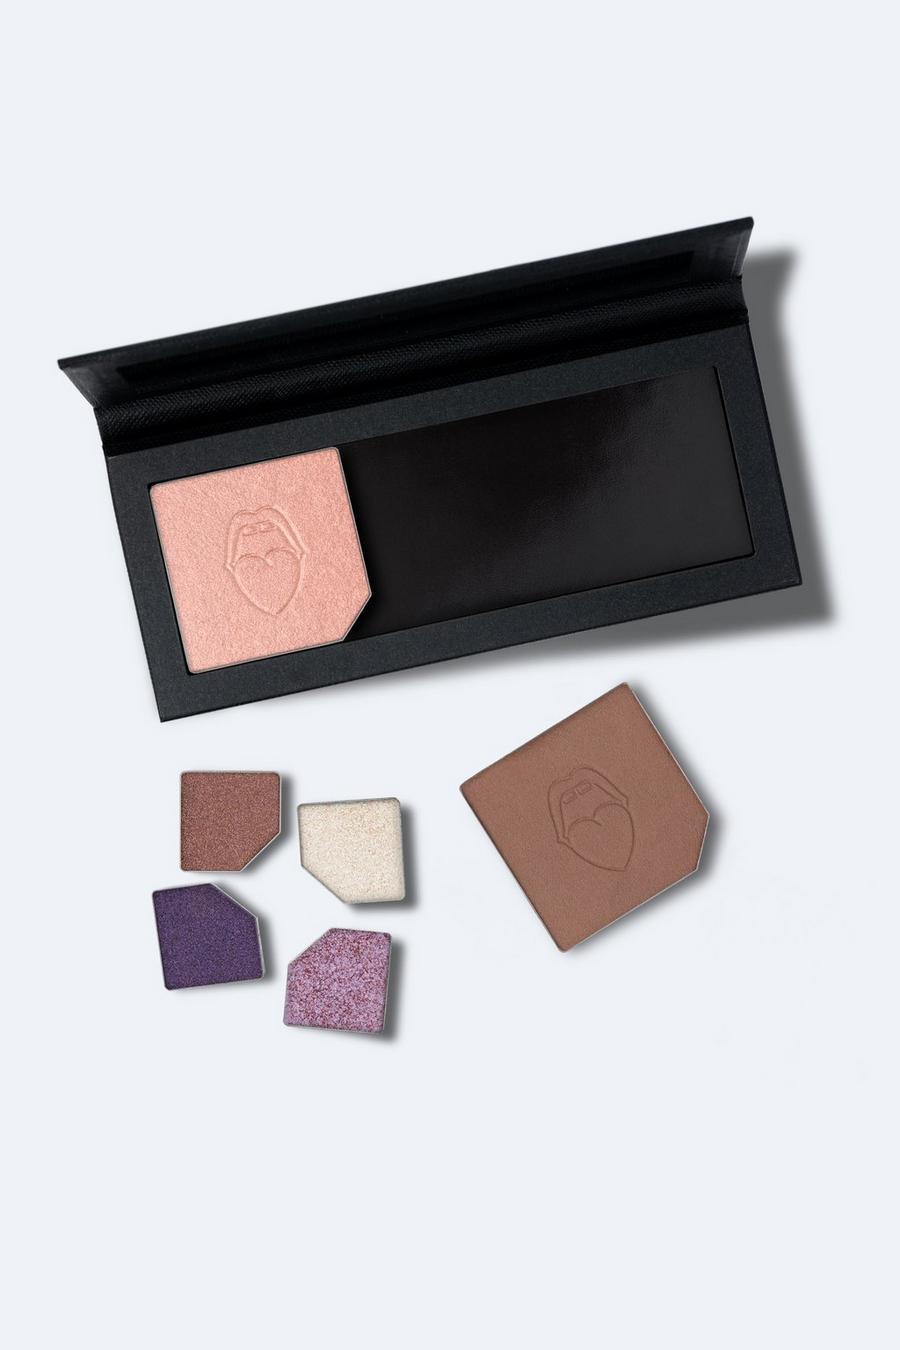 Nasty Gal Beauty Customizable Magnetic Palette